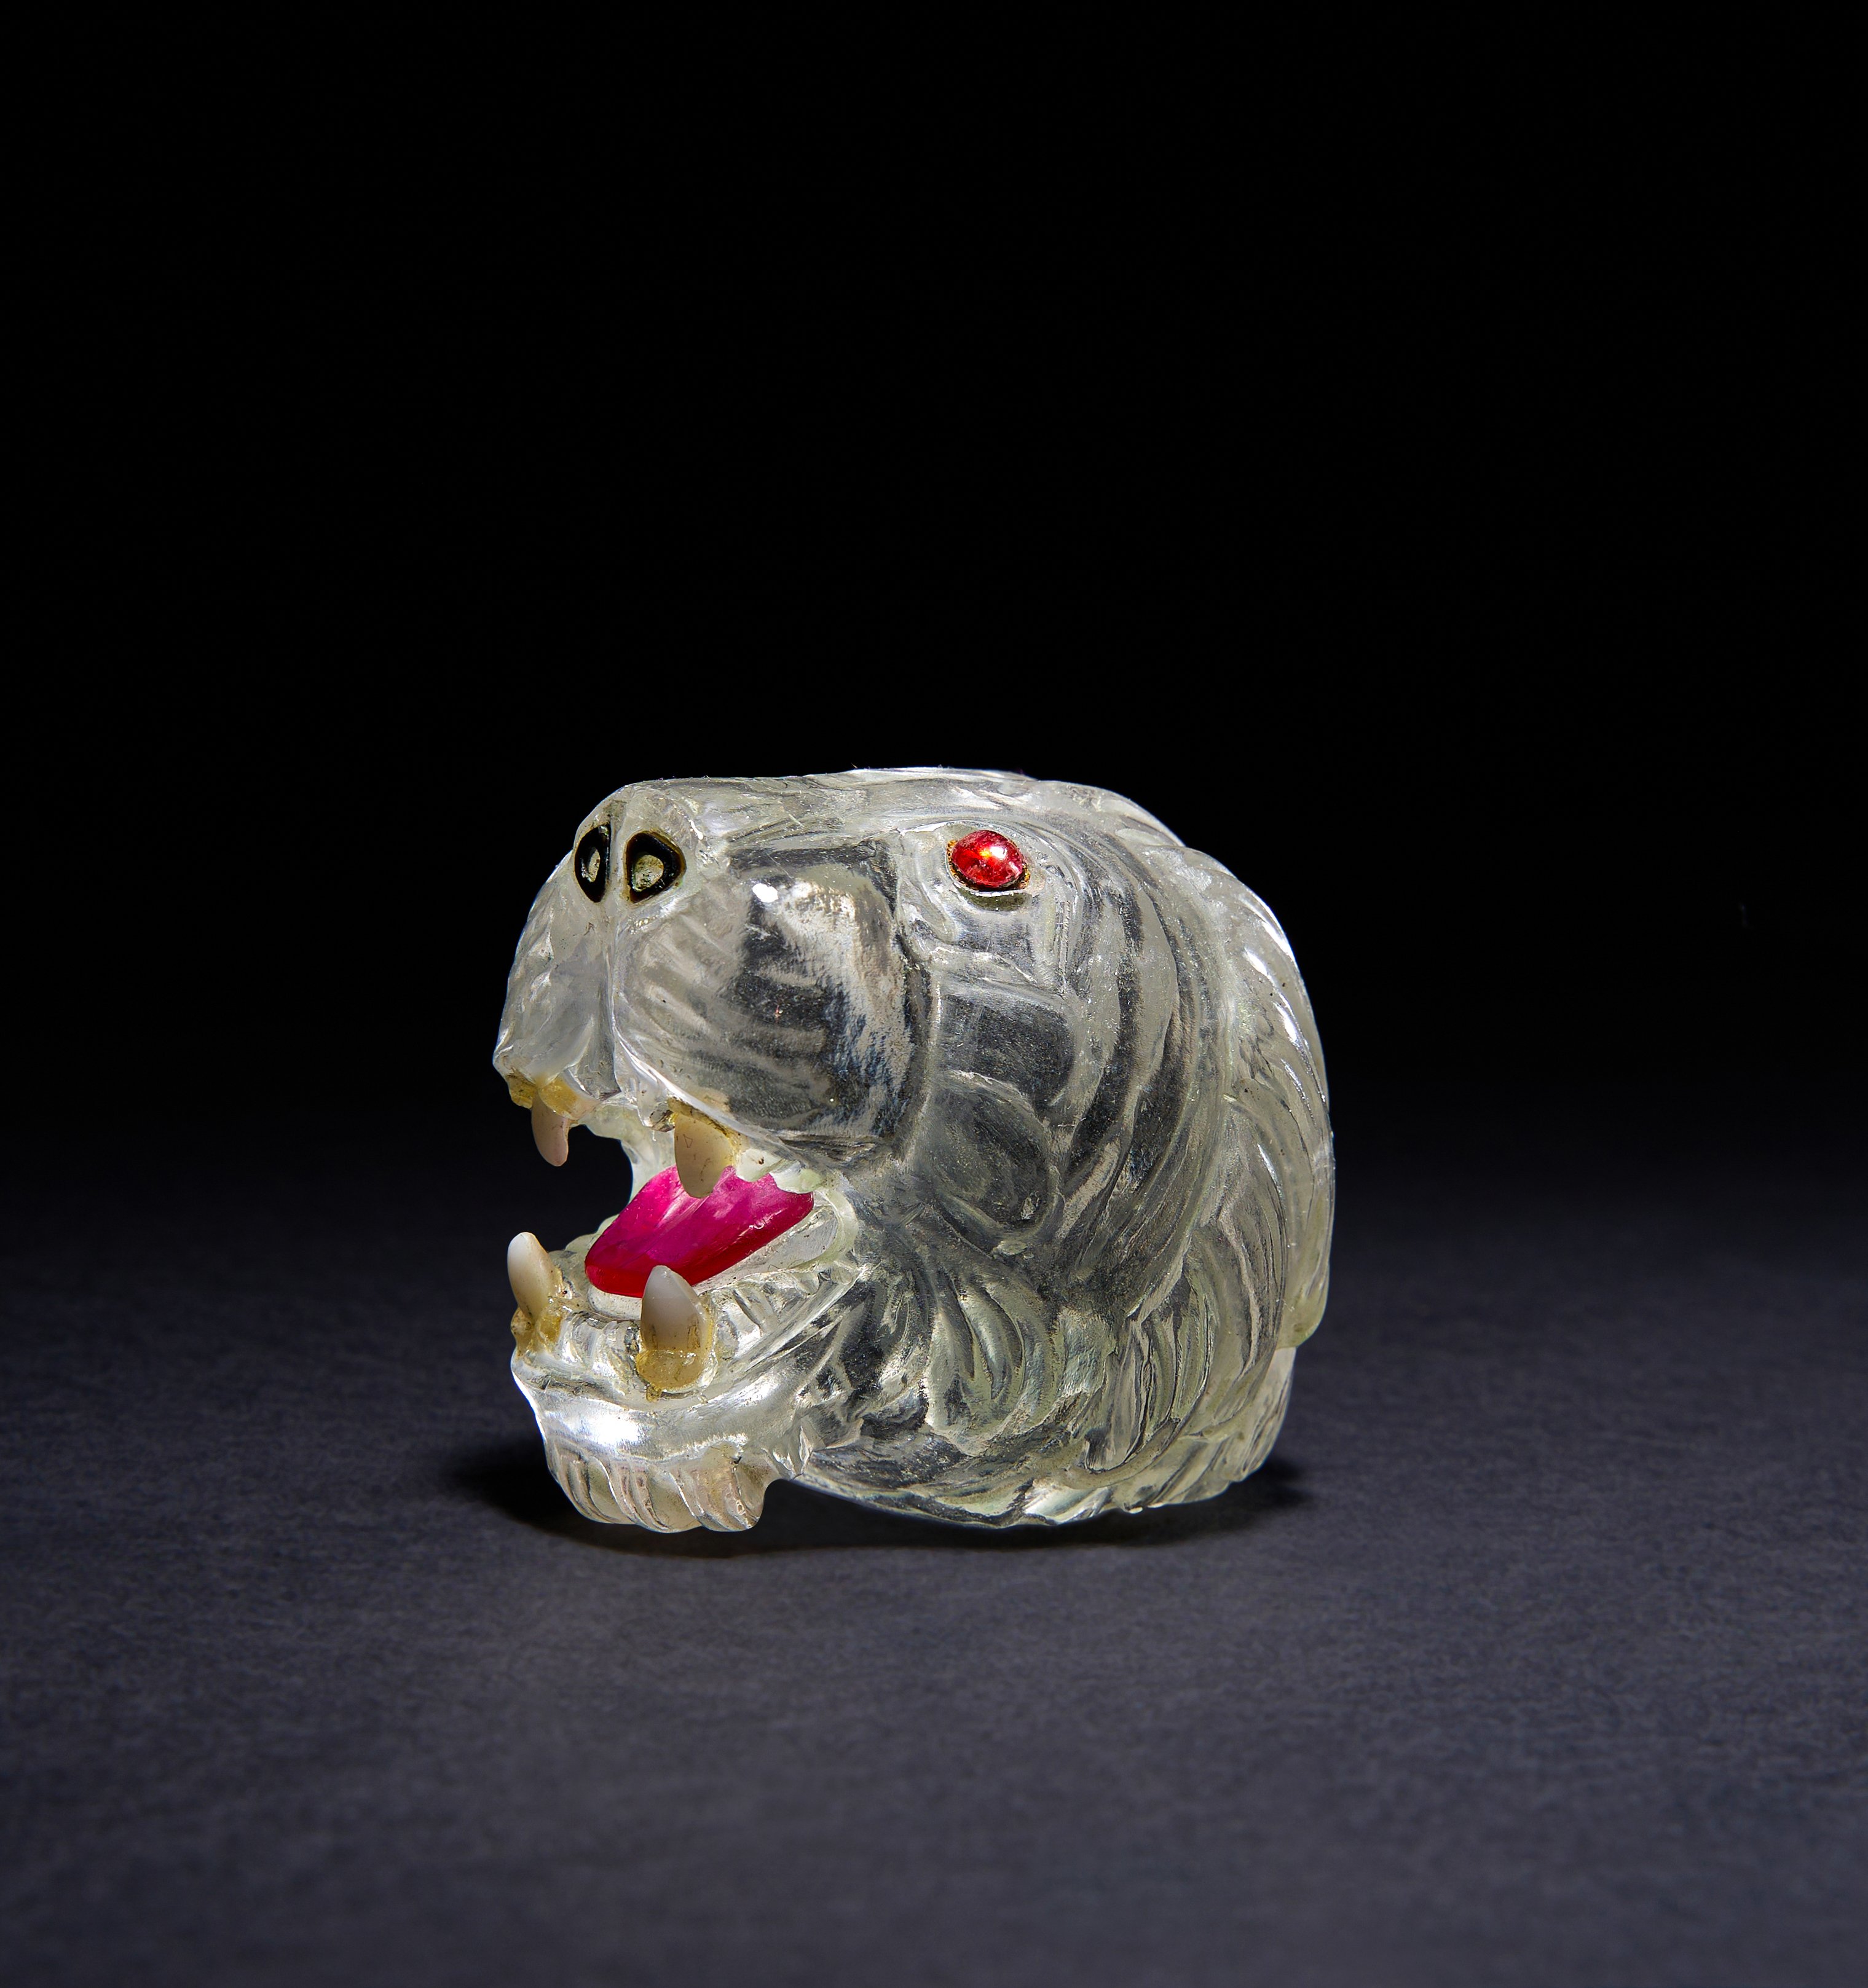 A LARGE MUGHAL GEM SET ROCK CRYSTAL CARVING OF A TIGHER HEAD WITH RUBY EYES & TONGUE, 18TH/19TH CENT